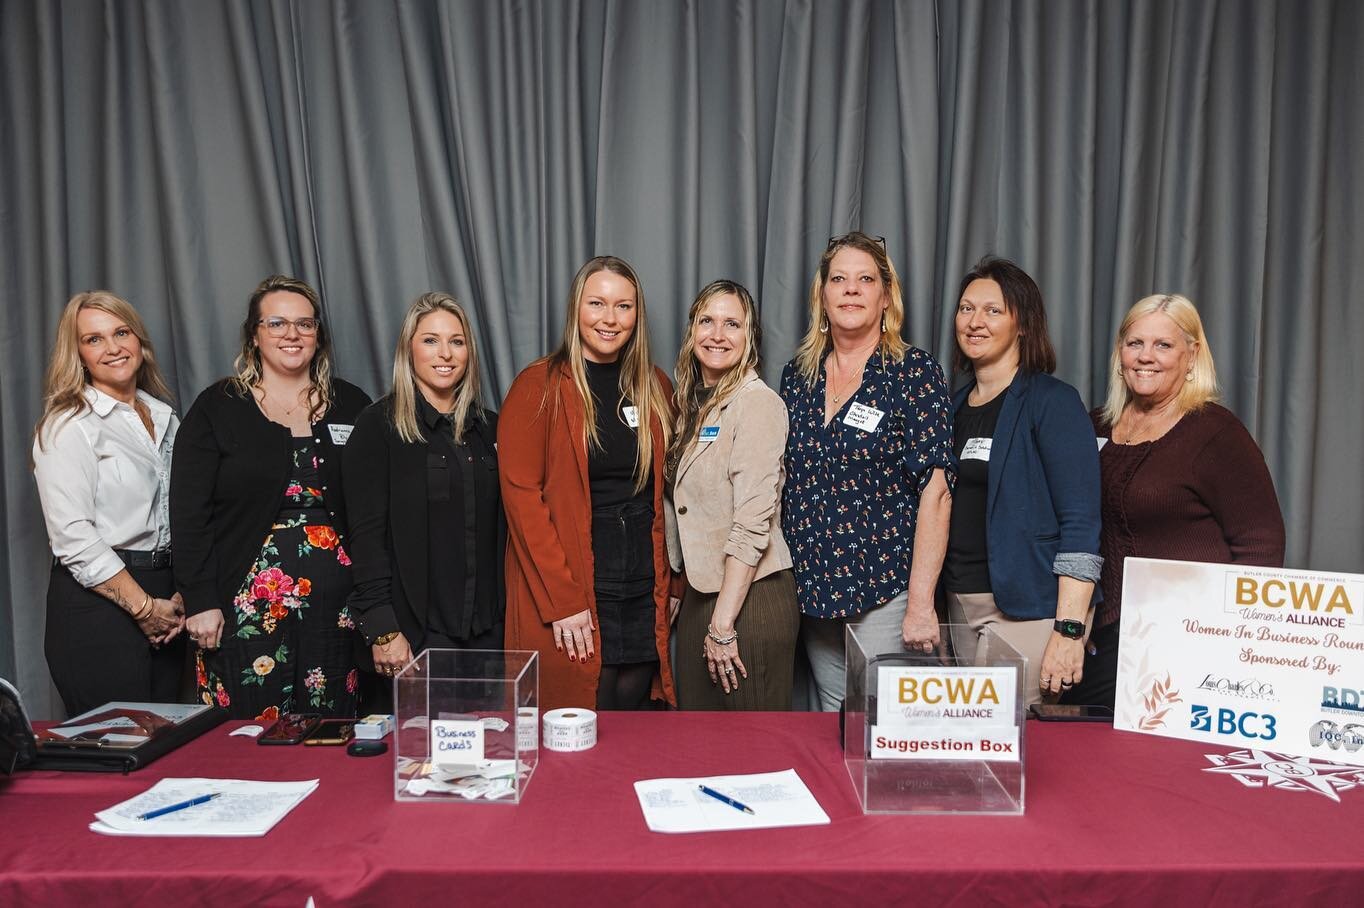 🥂Cheers to Tanya Wise, our Operations Manager, for spearheading the inaugural Butler County Chamber Women&rsquo;s Alliance Business Roundtable! With the support of her dedicated committee, she empowered 65 women in Butler County, providing a platfor